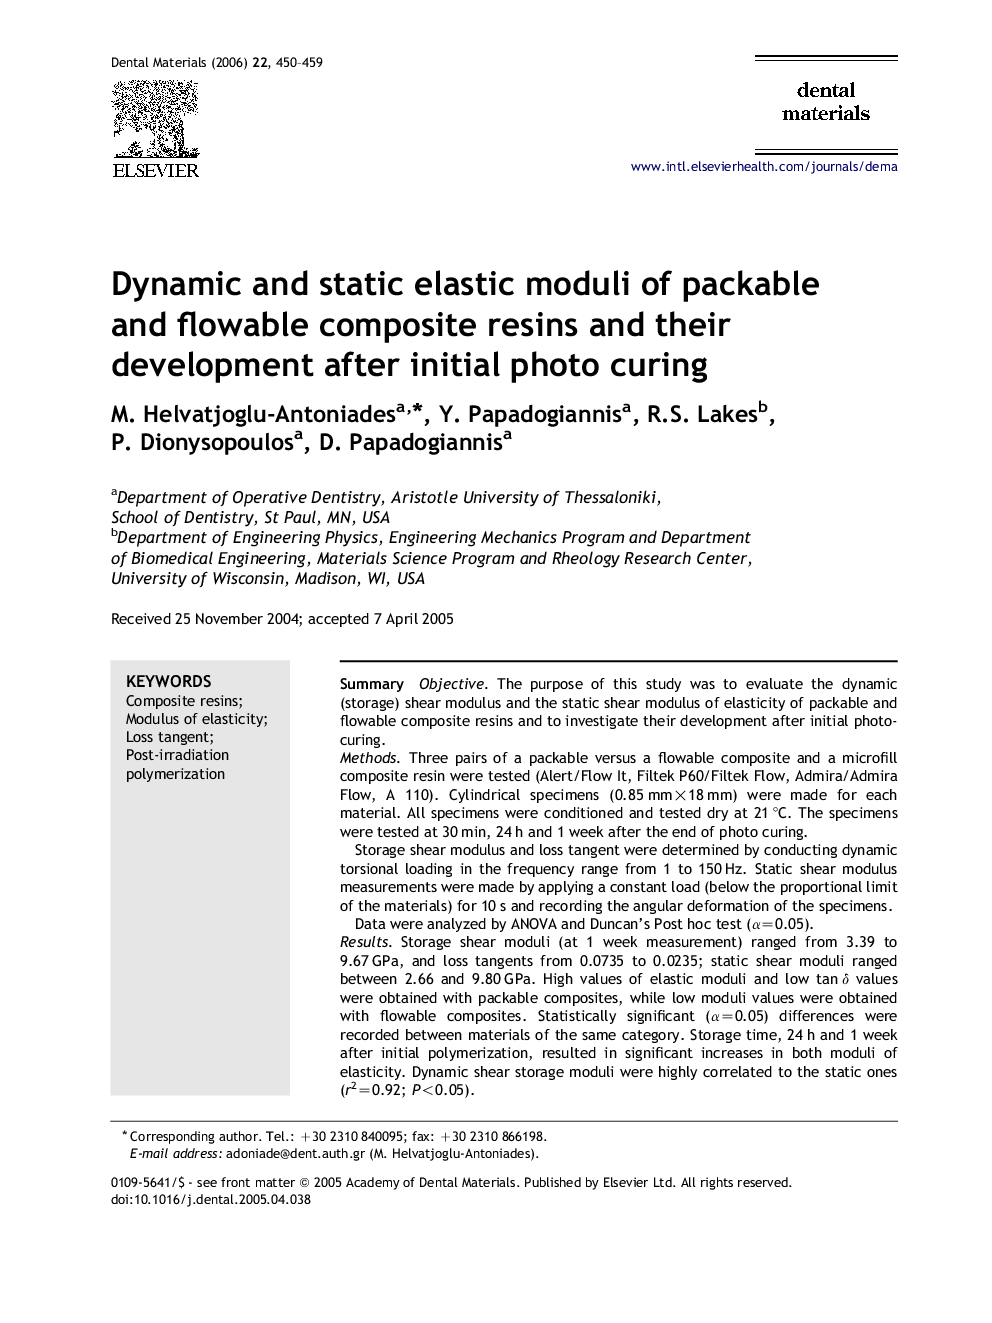 Dynamic and static elastic moduli of packable and flowable composite resins and their development after initial photo curing